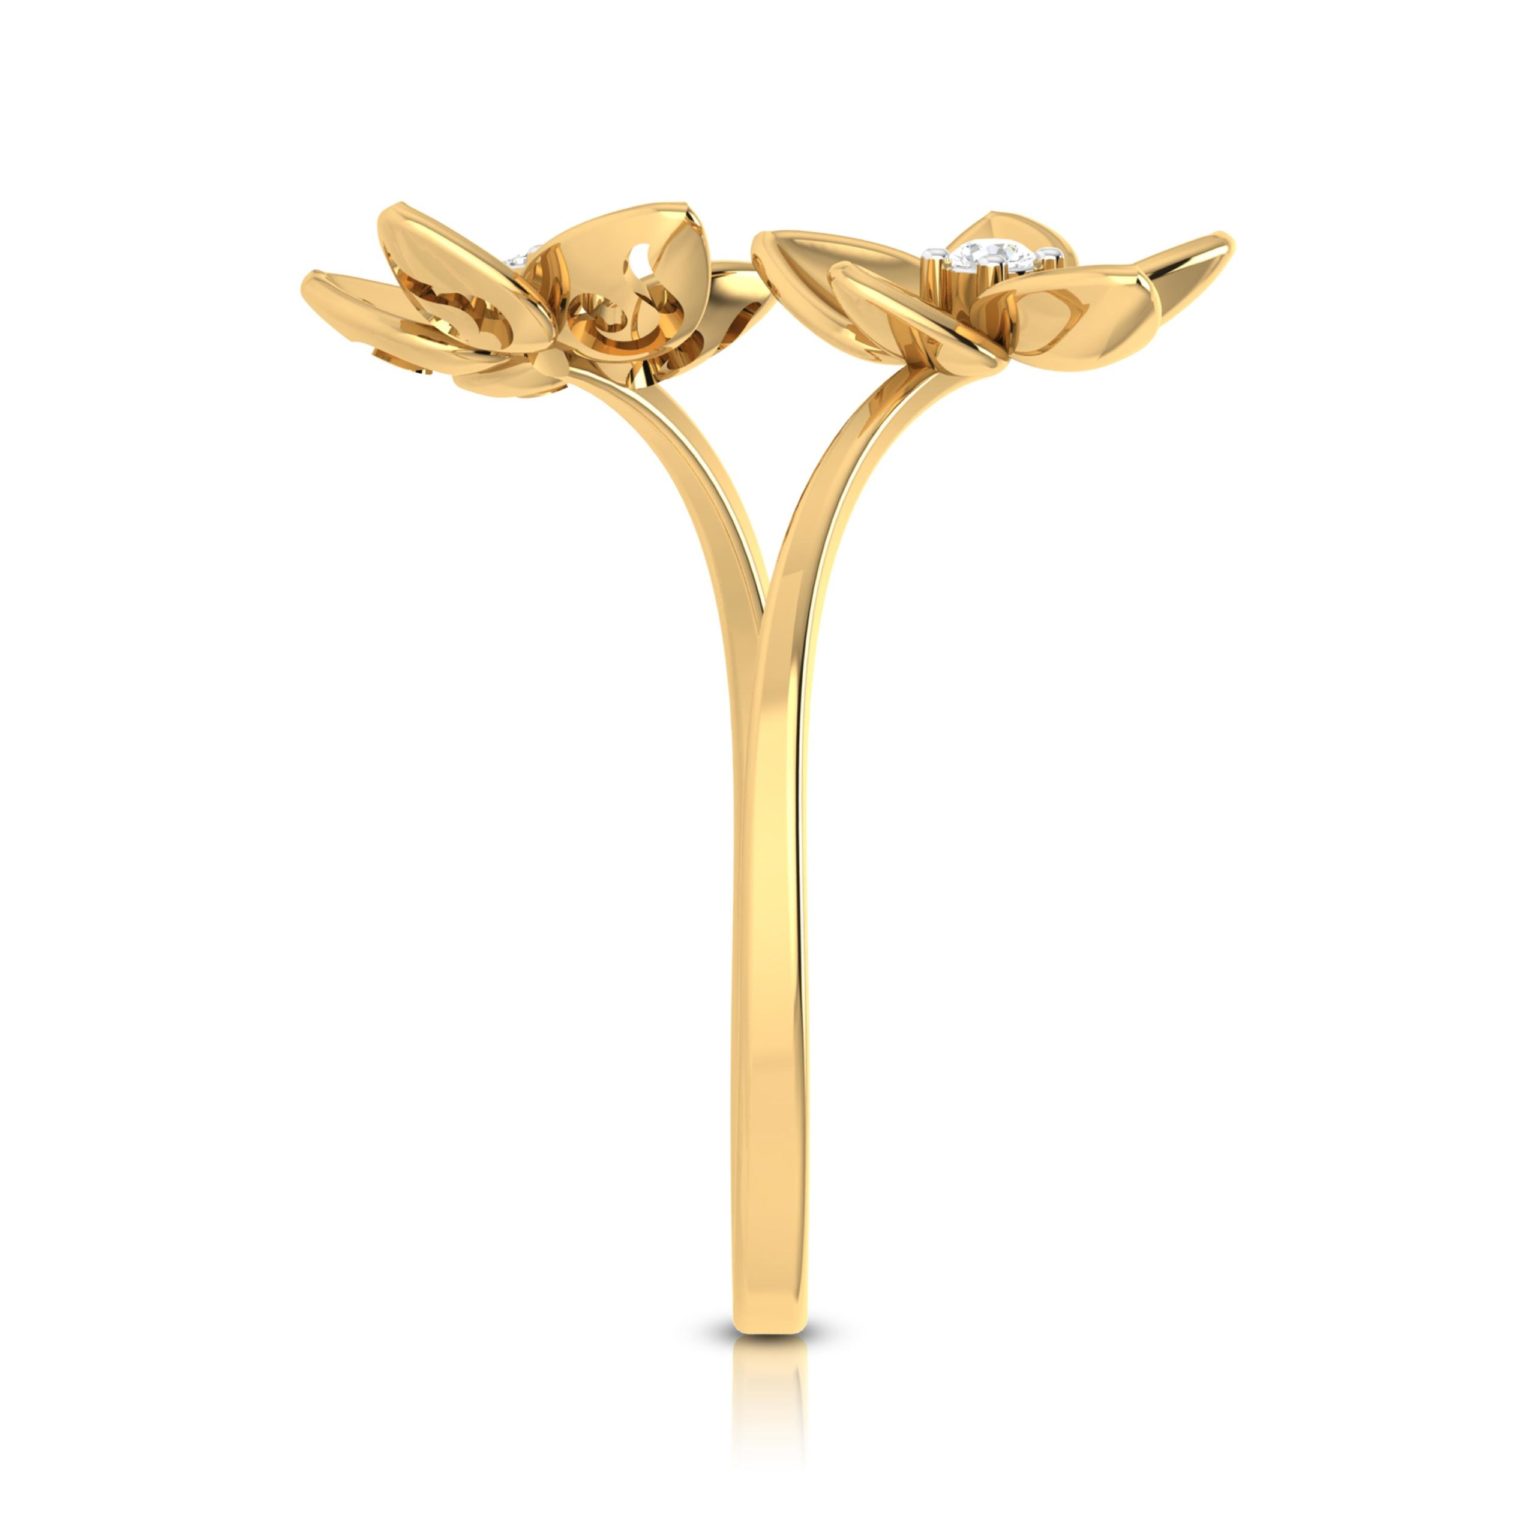 Blooming Ring Collection – 18 Kt – Rmdg Adr – 1923